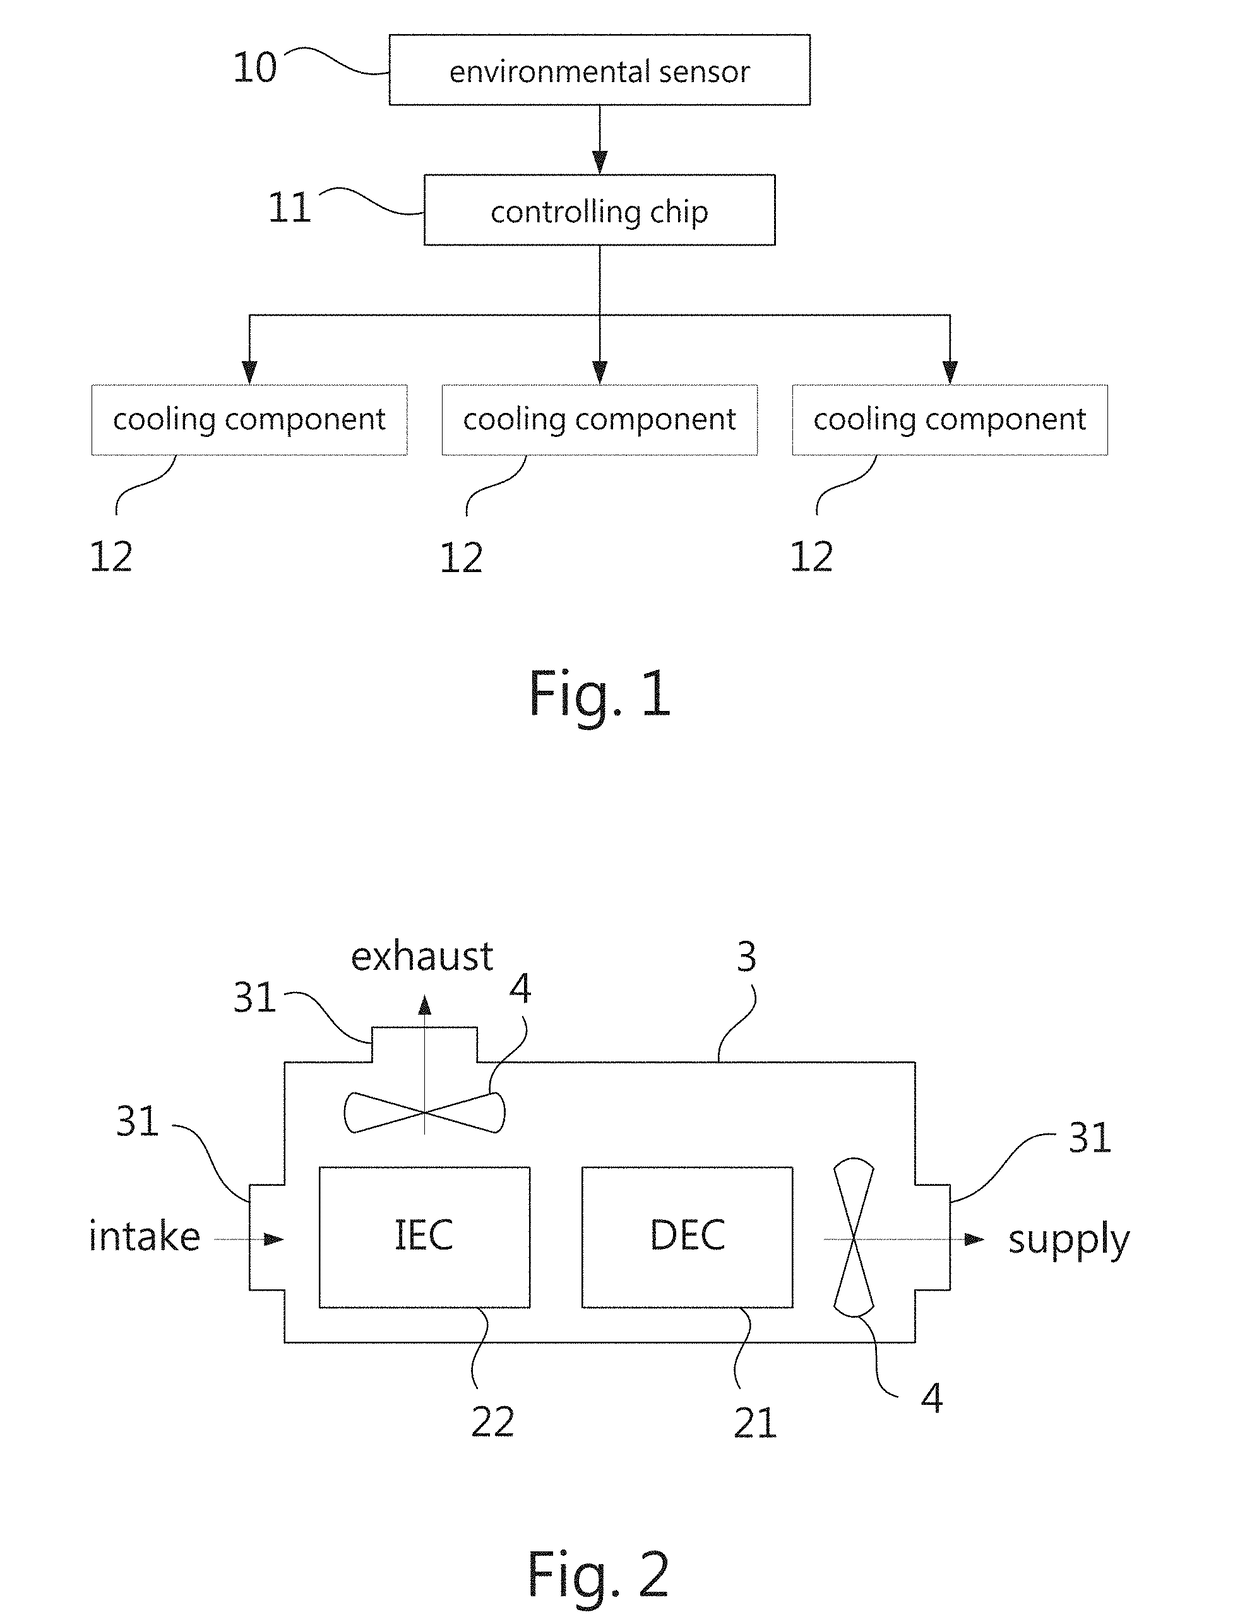 Multi-component air-conditioning systems configuration, control and operation